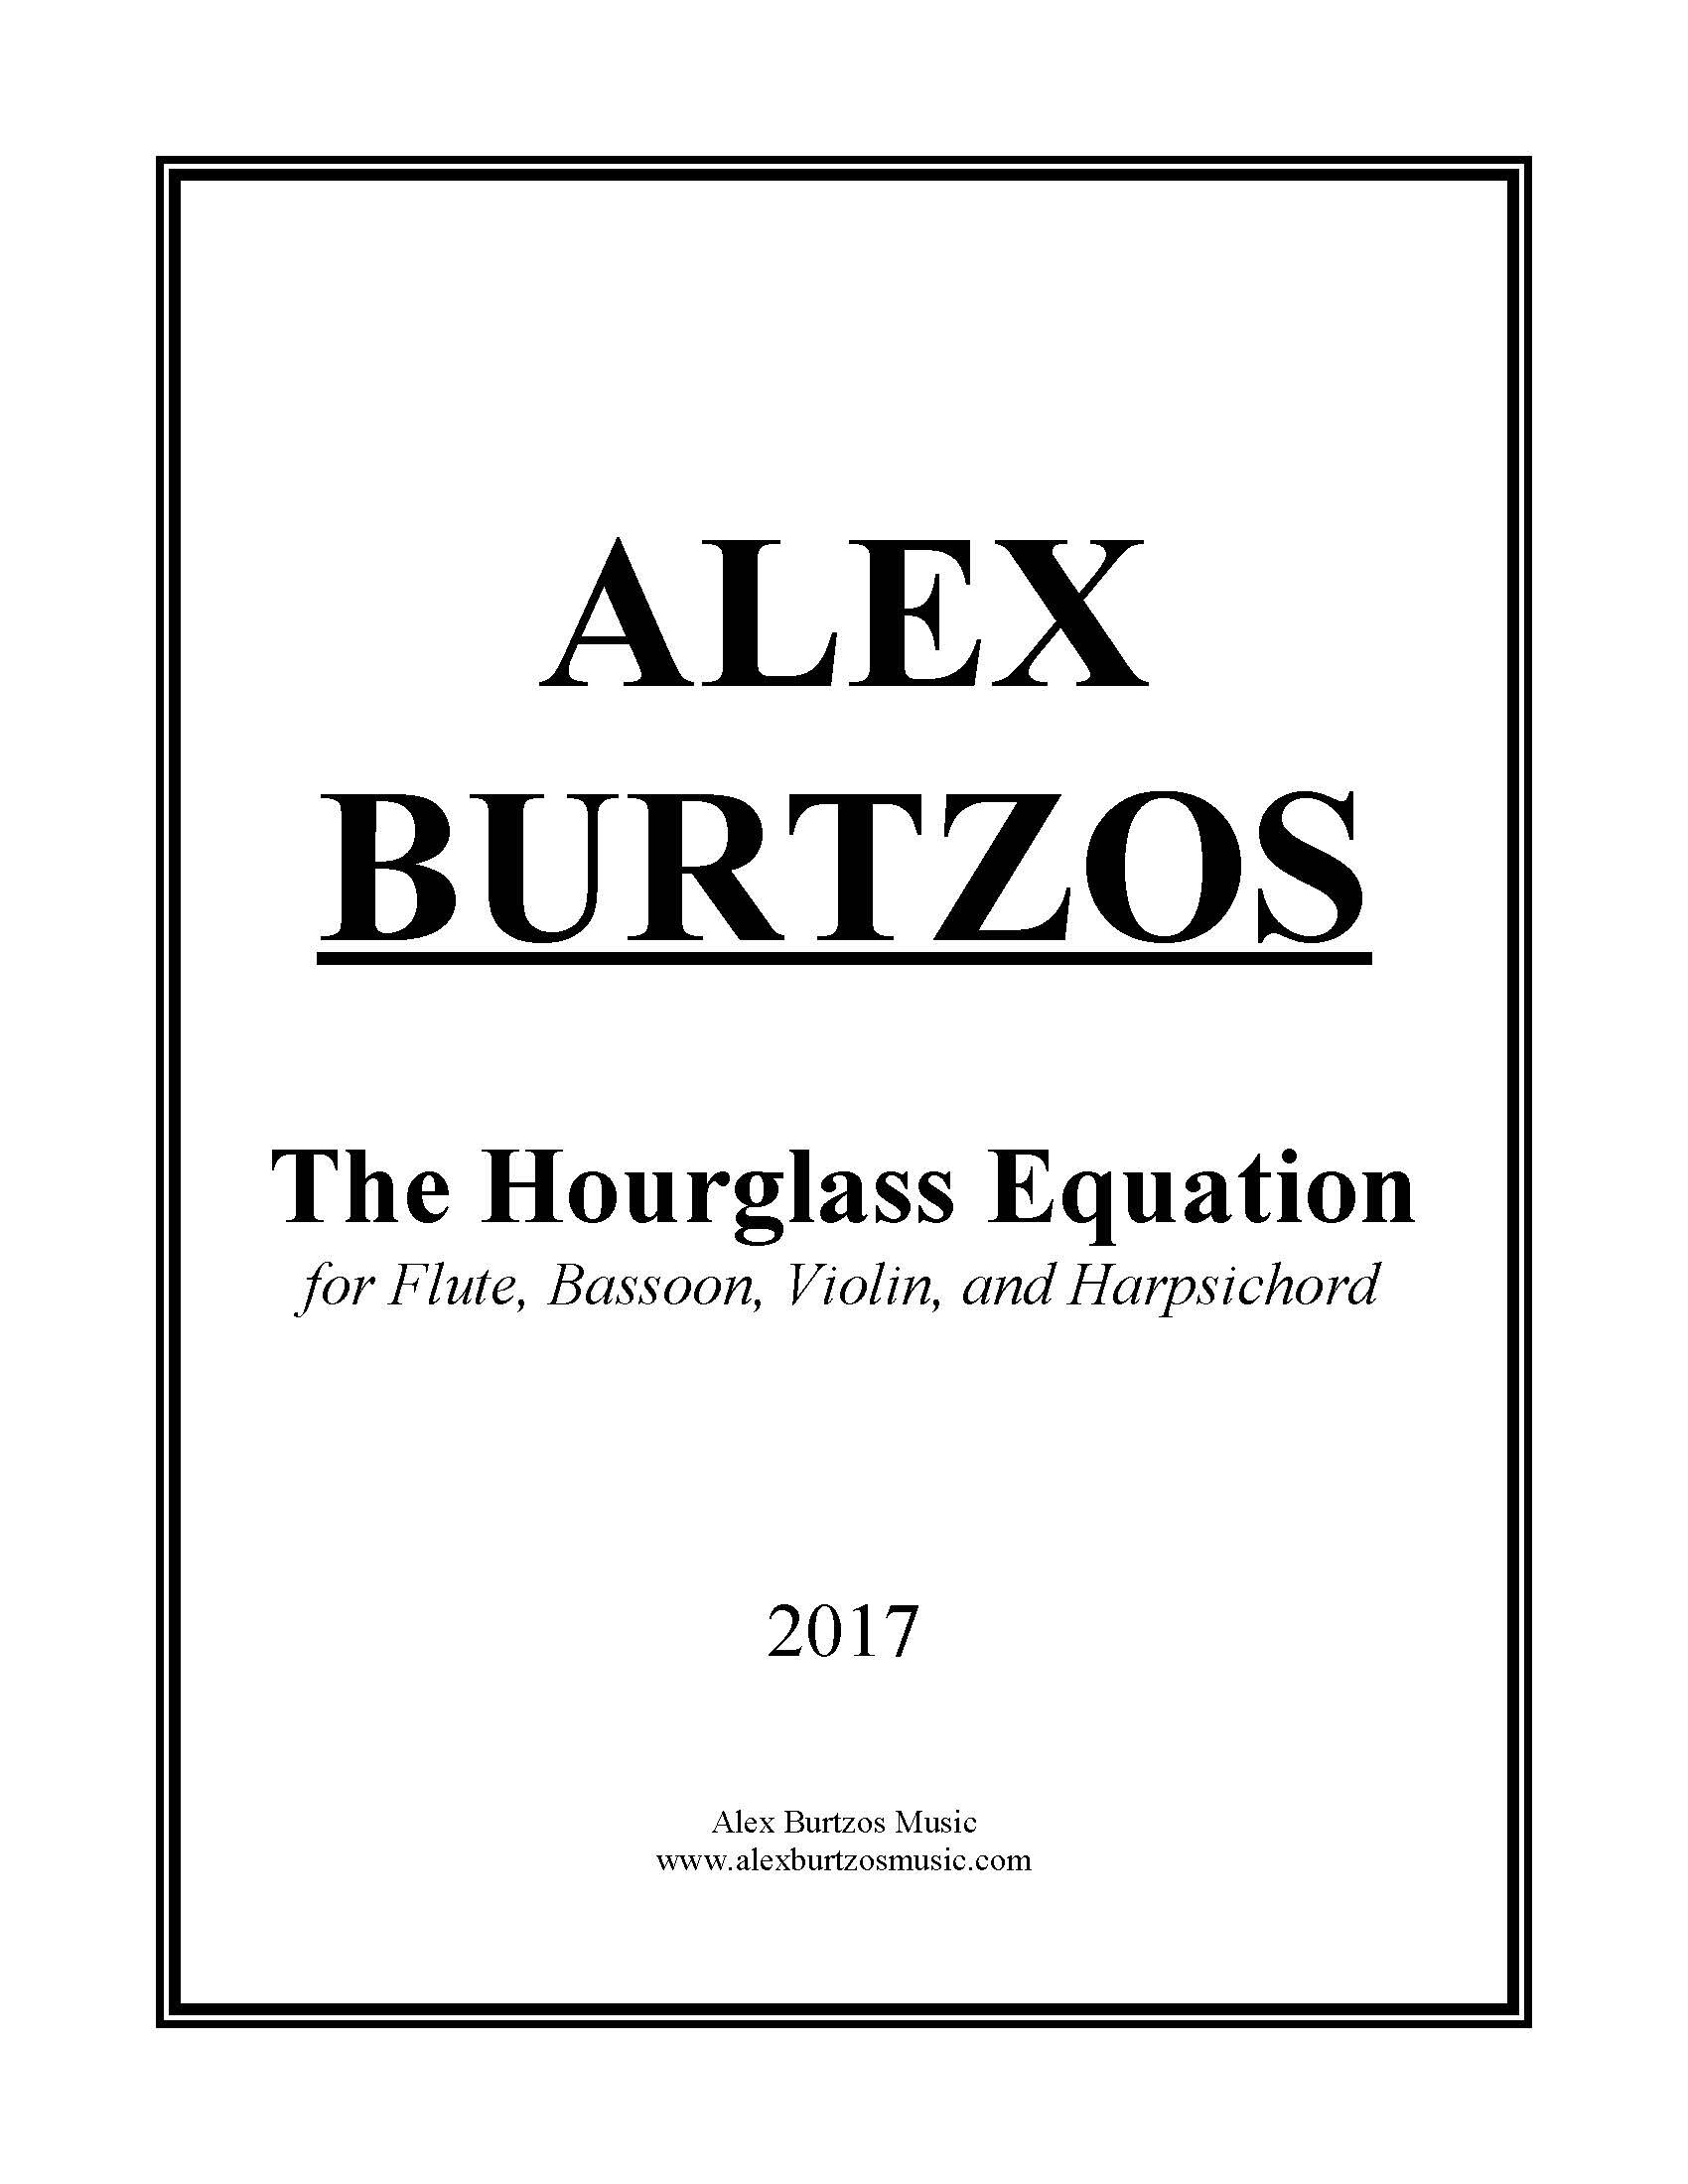 The Hourglass Equation - Complete Score_Page_01.jpg